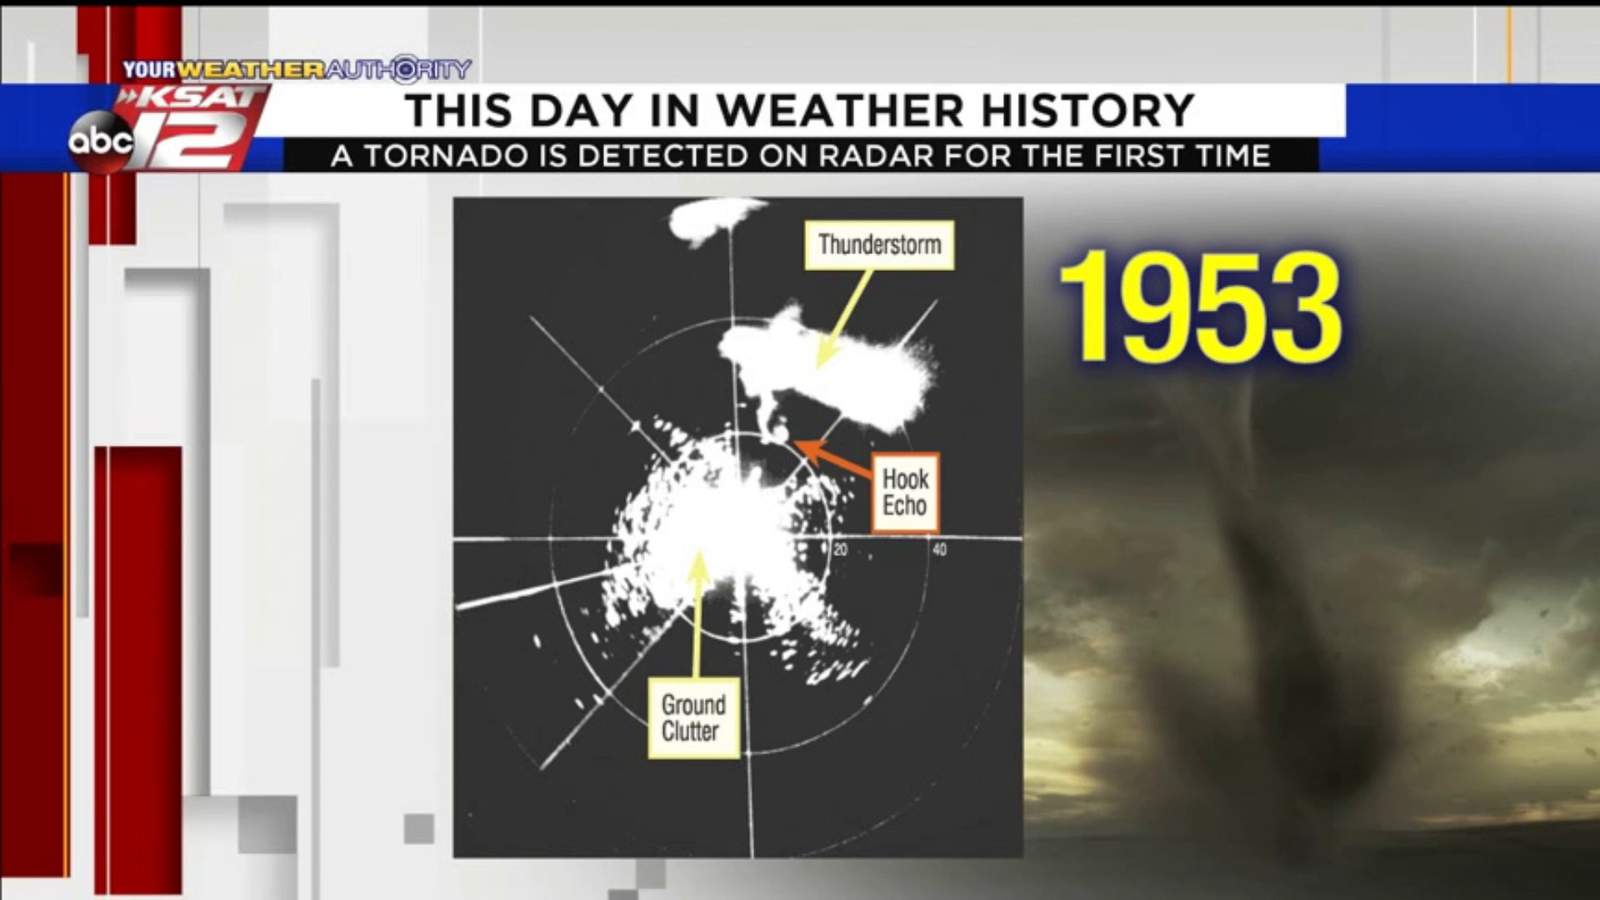 This Day in Weather History: April 9, 2020